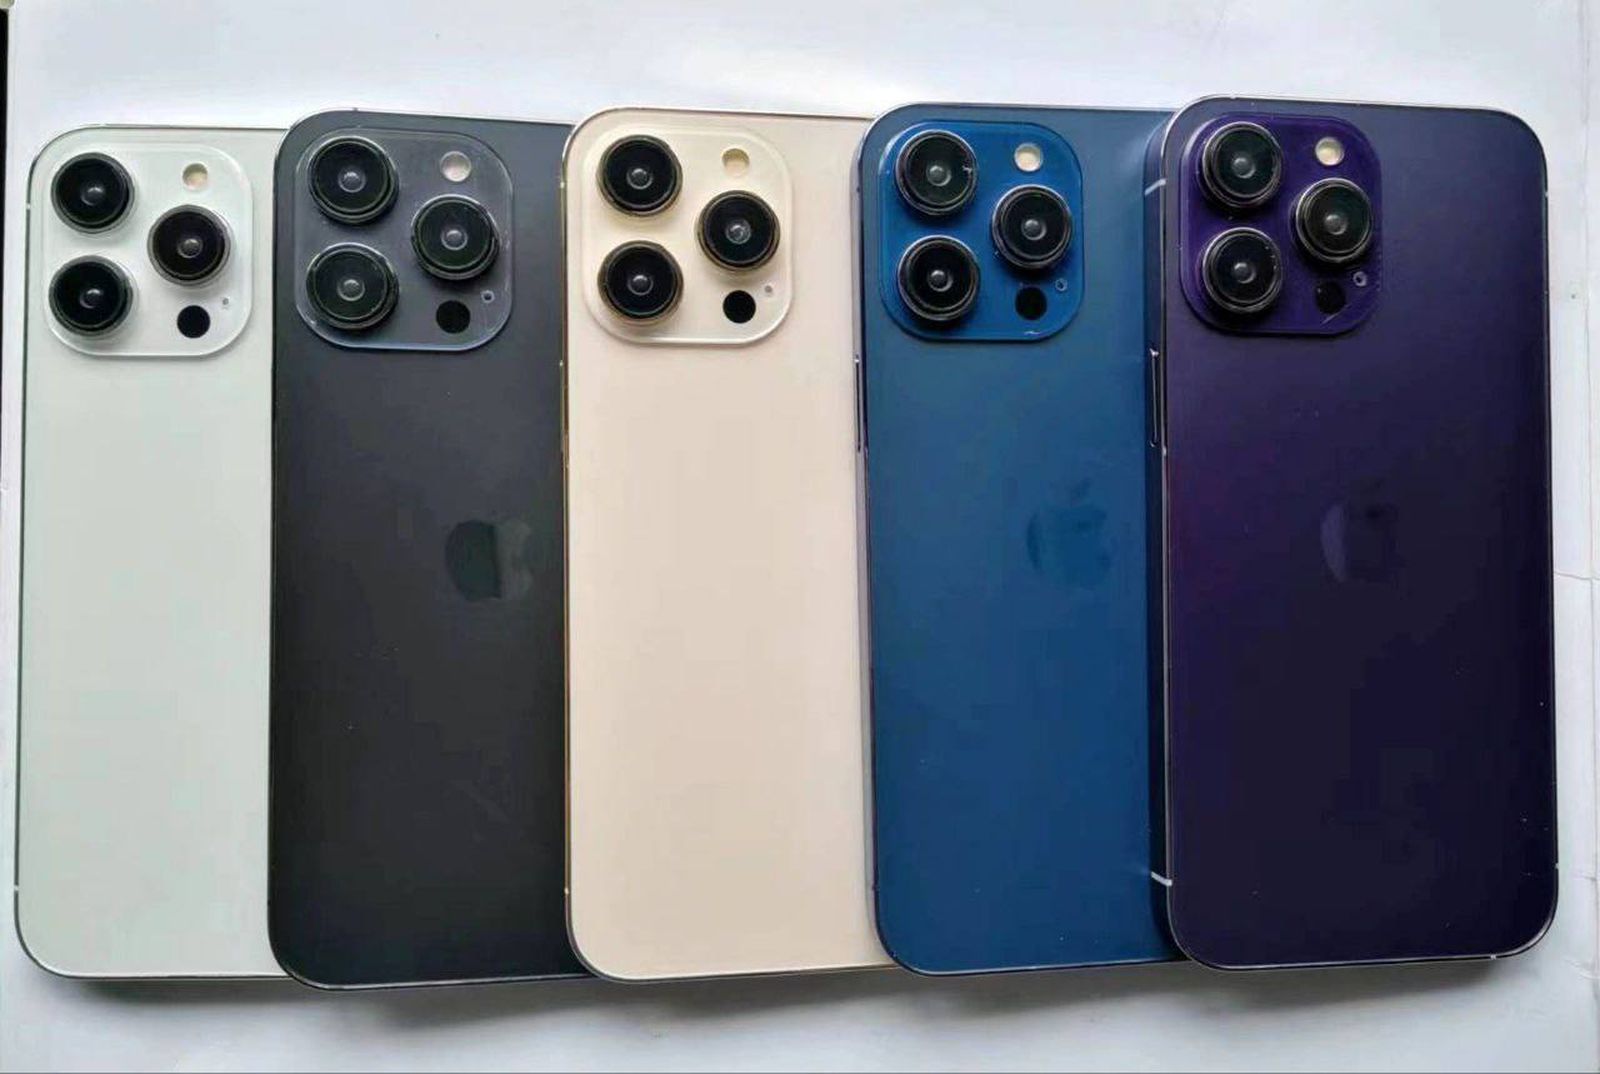 Apple iPhone 14 Pro color options leaked online ahead of launch